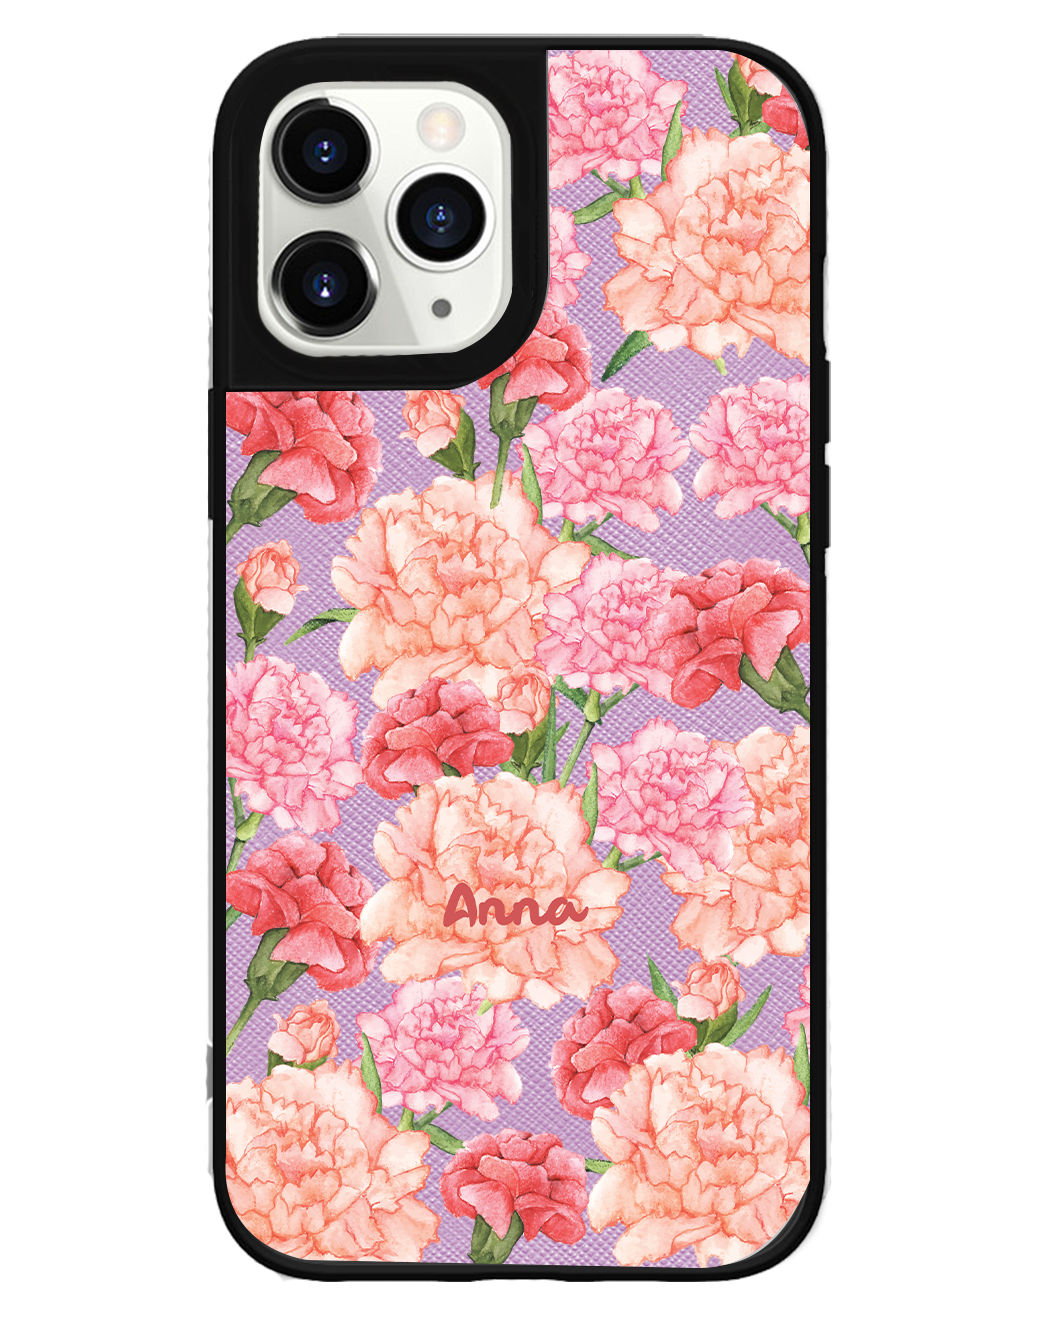 iPhone Leather Grip Case - January Carnation